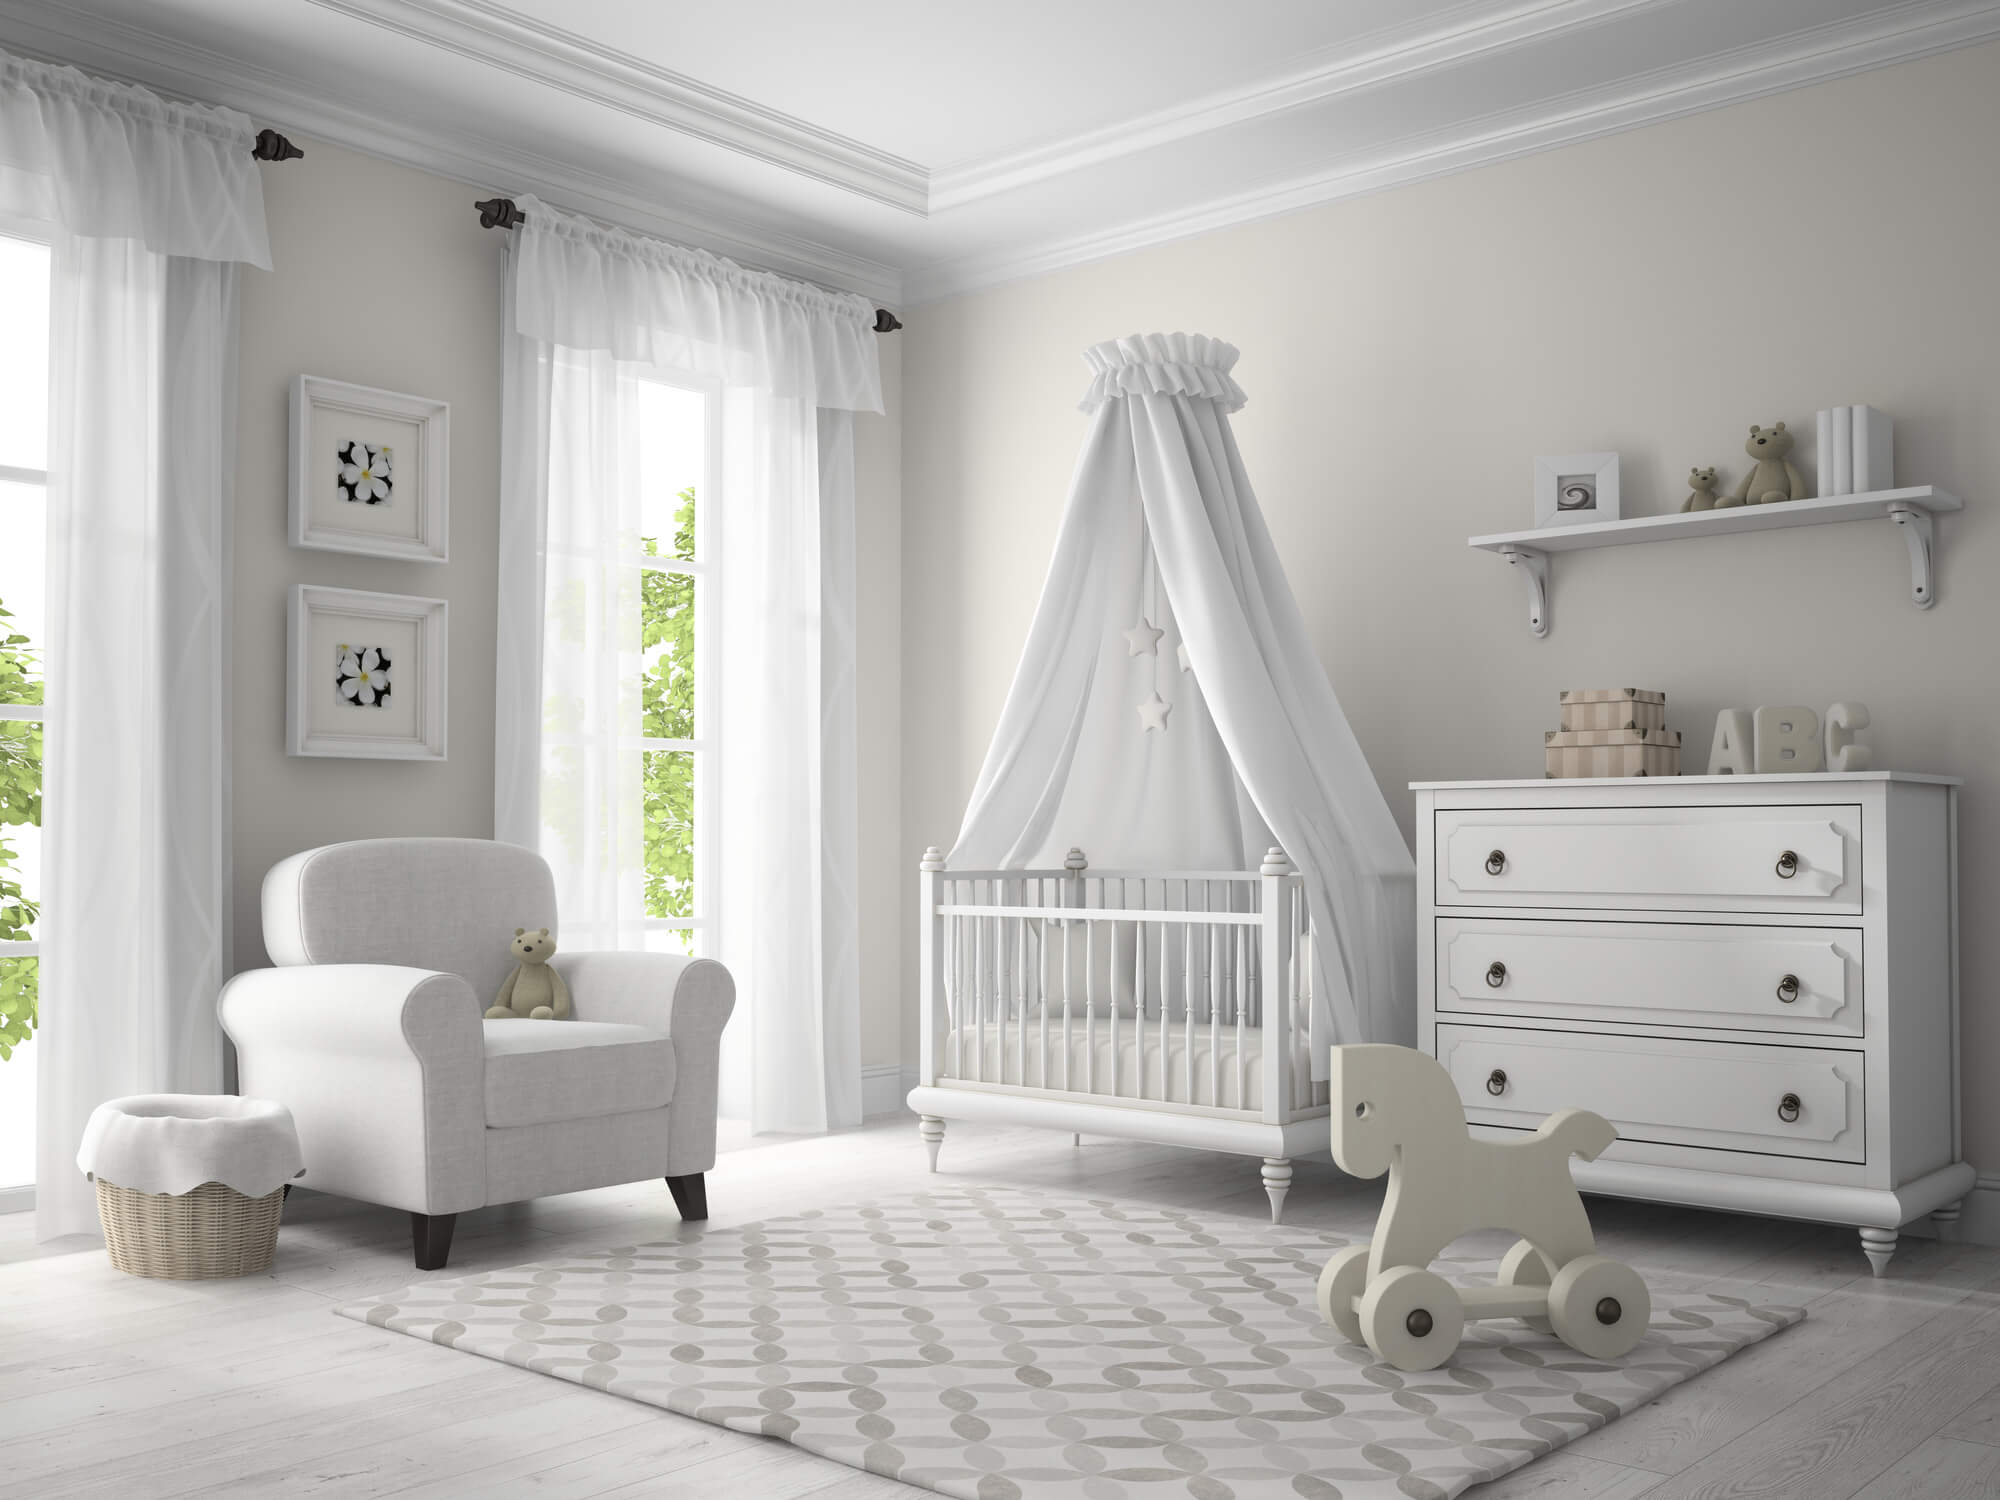 Consider These Tips Before You Buy Curtains for the Baby’s Room!